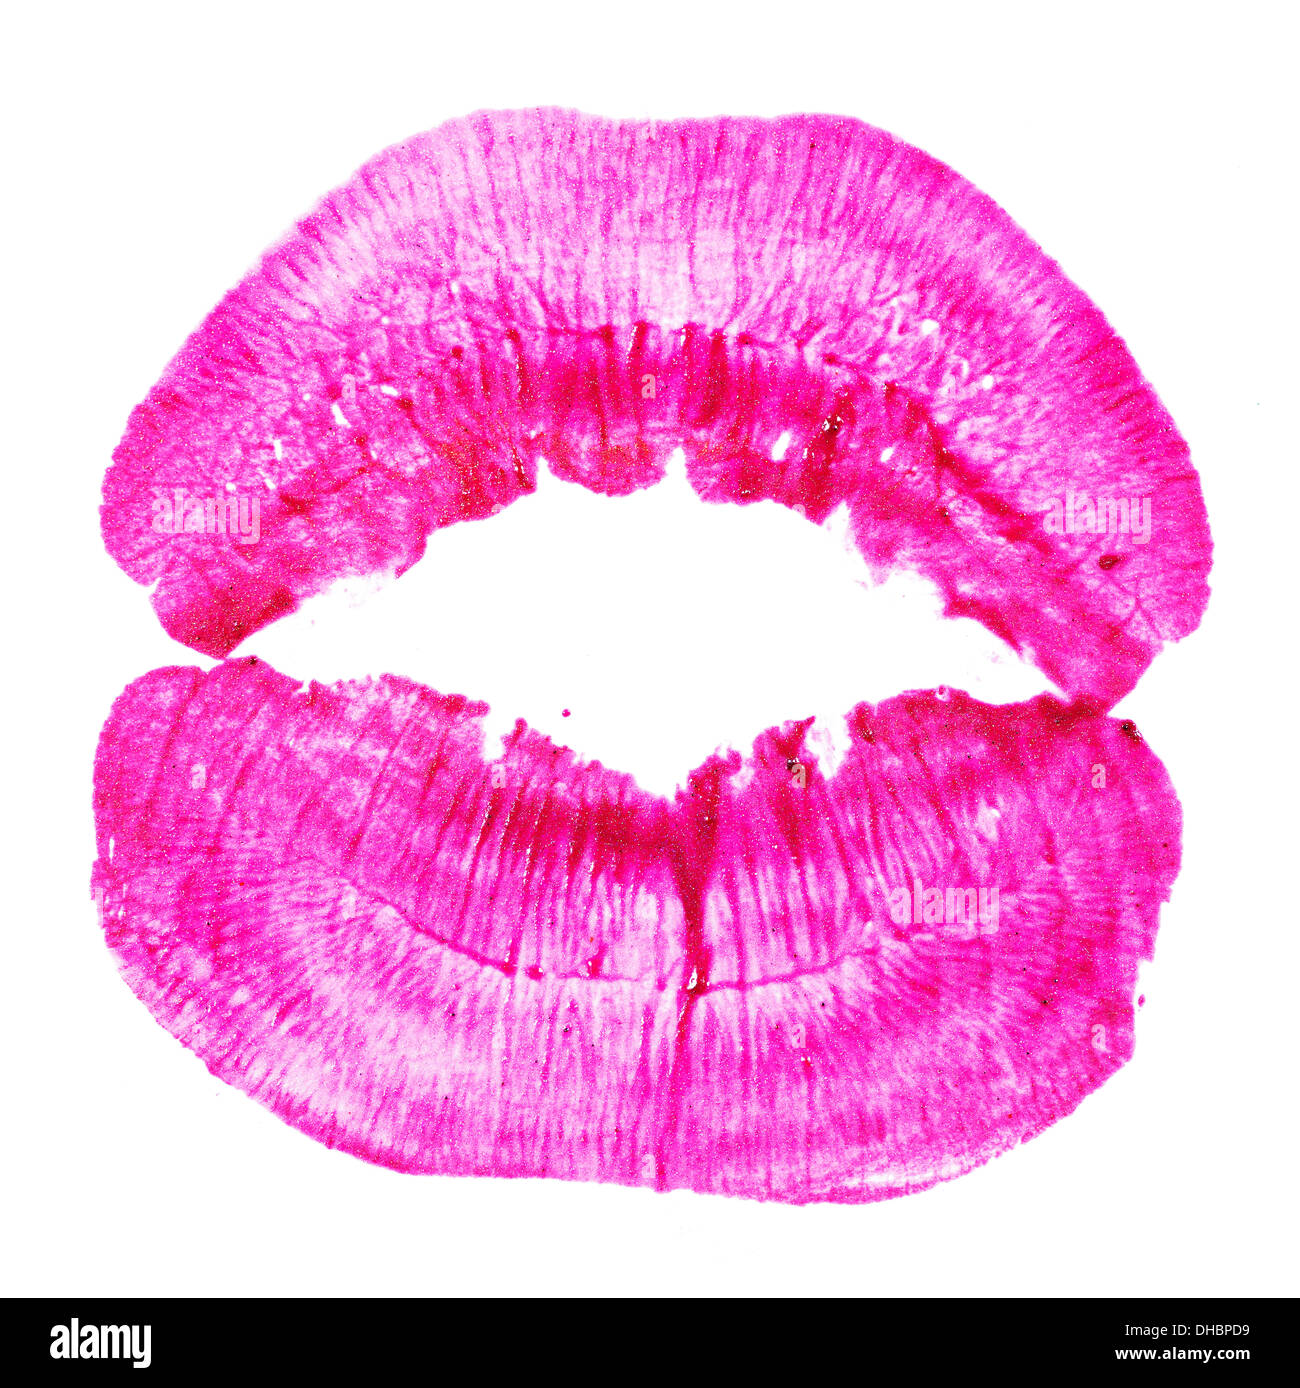 Pink lipstick kiss. Square composition. Stock Photo